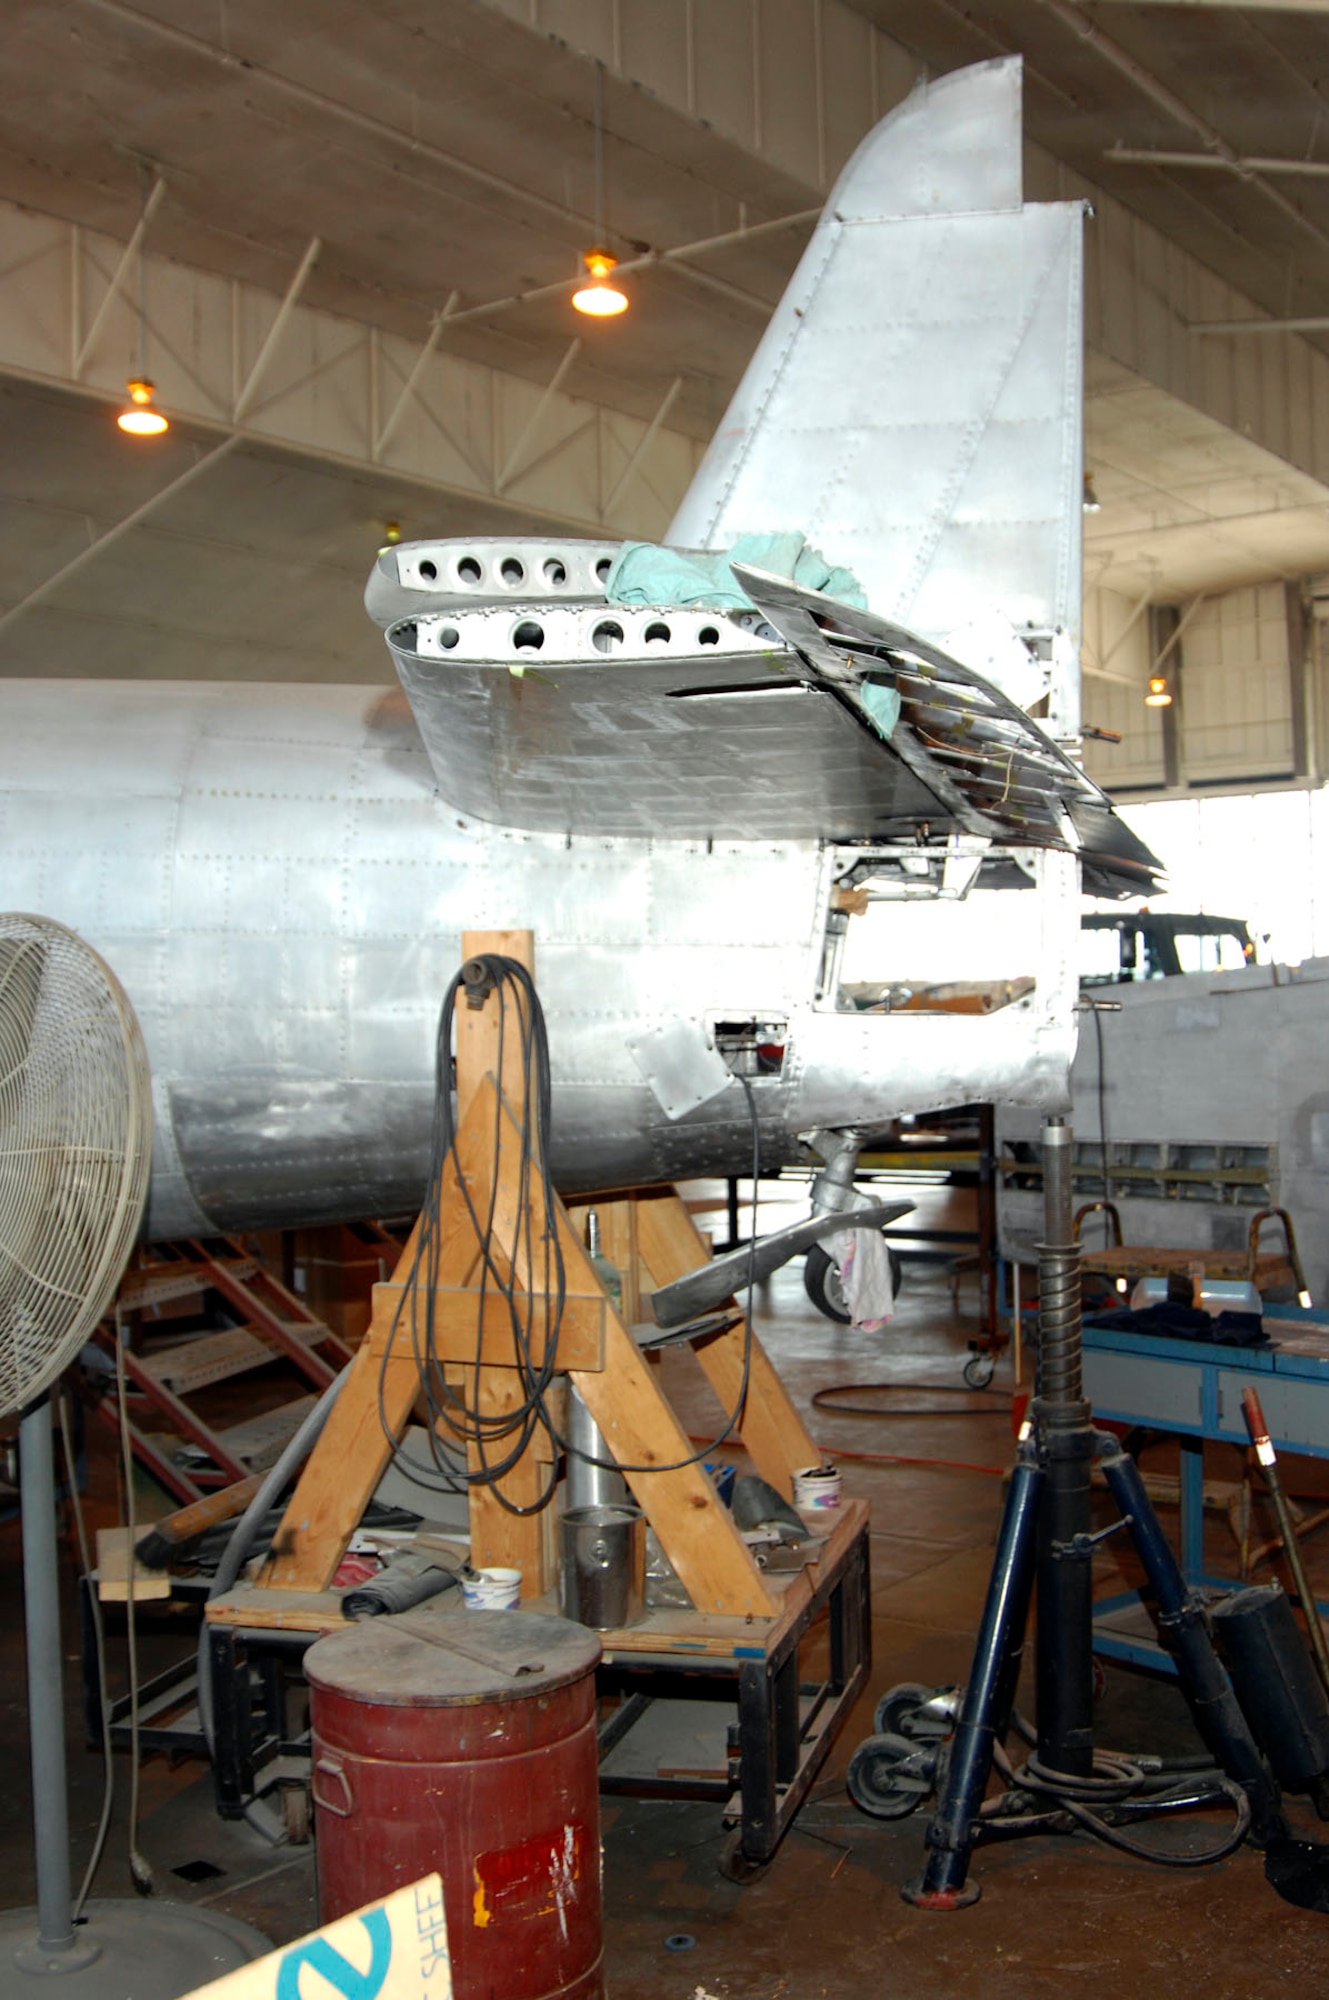 DAYTON, Ohio (02/2007) -- Japanese George tail section in the restoration area of the National Museum of the U.S. Air Force. (U.S. Air Force photo)